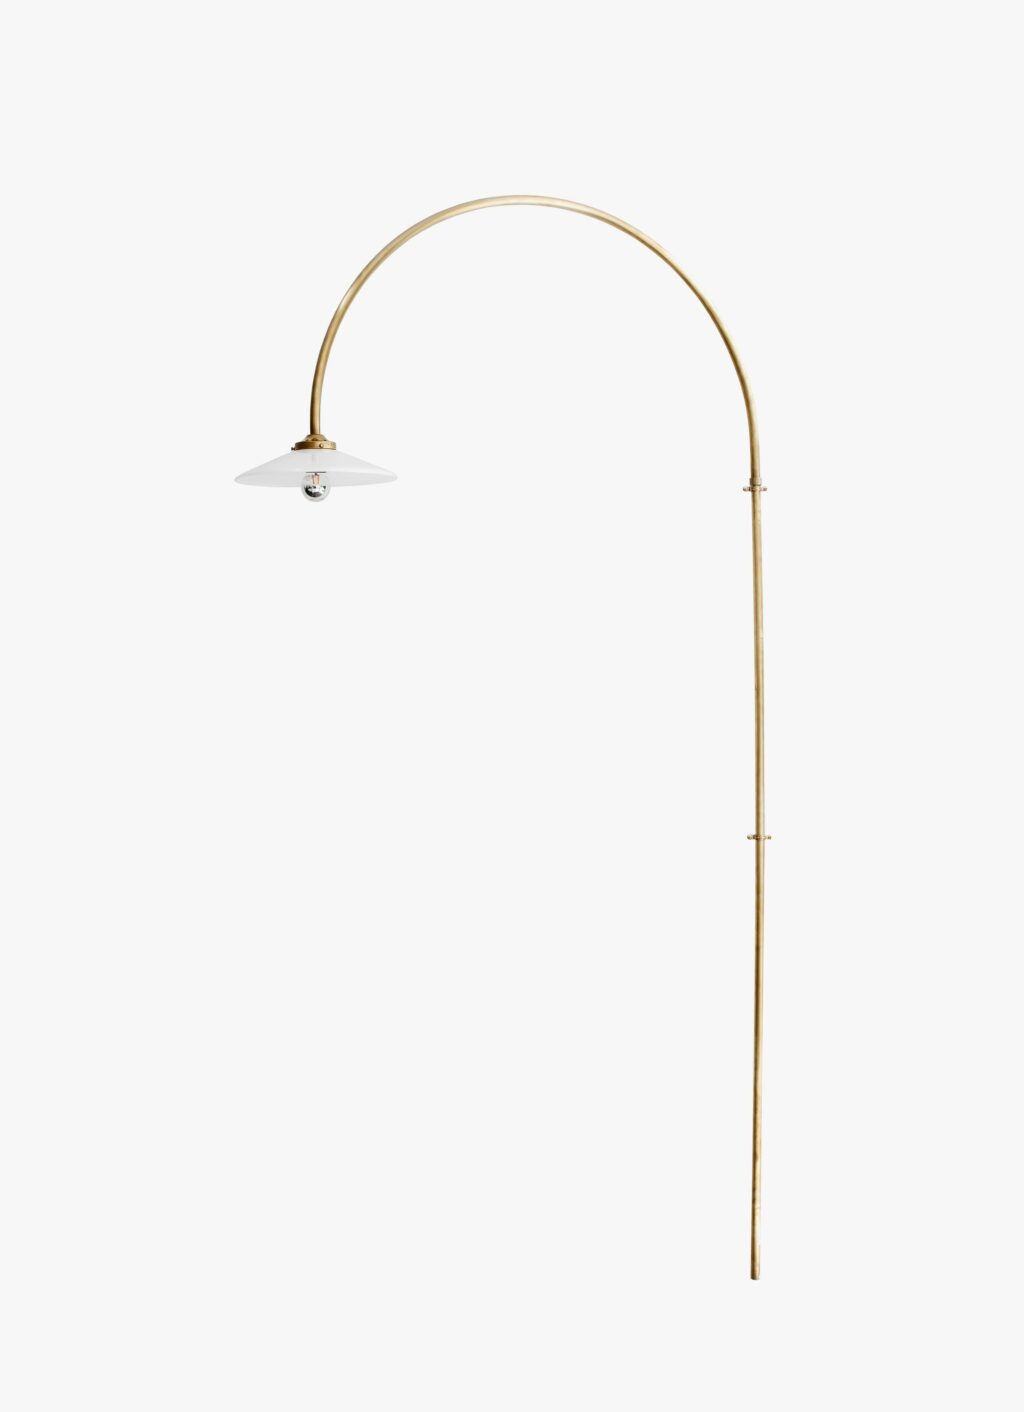 Valerie Objects - Hanging Lamp - No2 - dif. colors